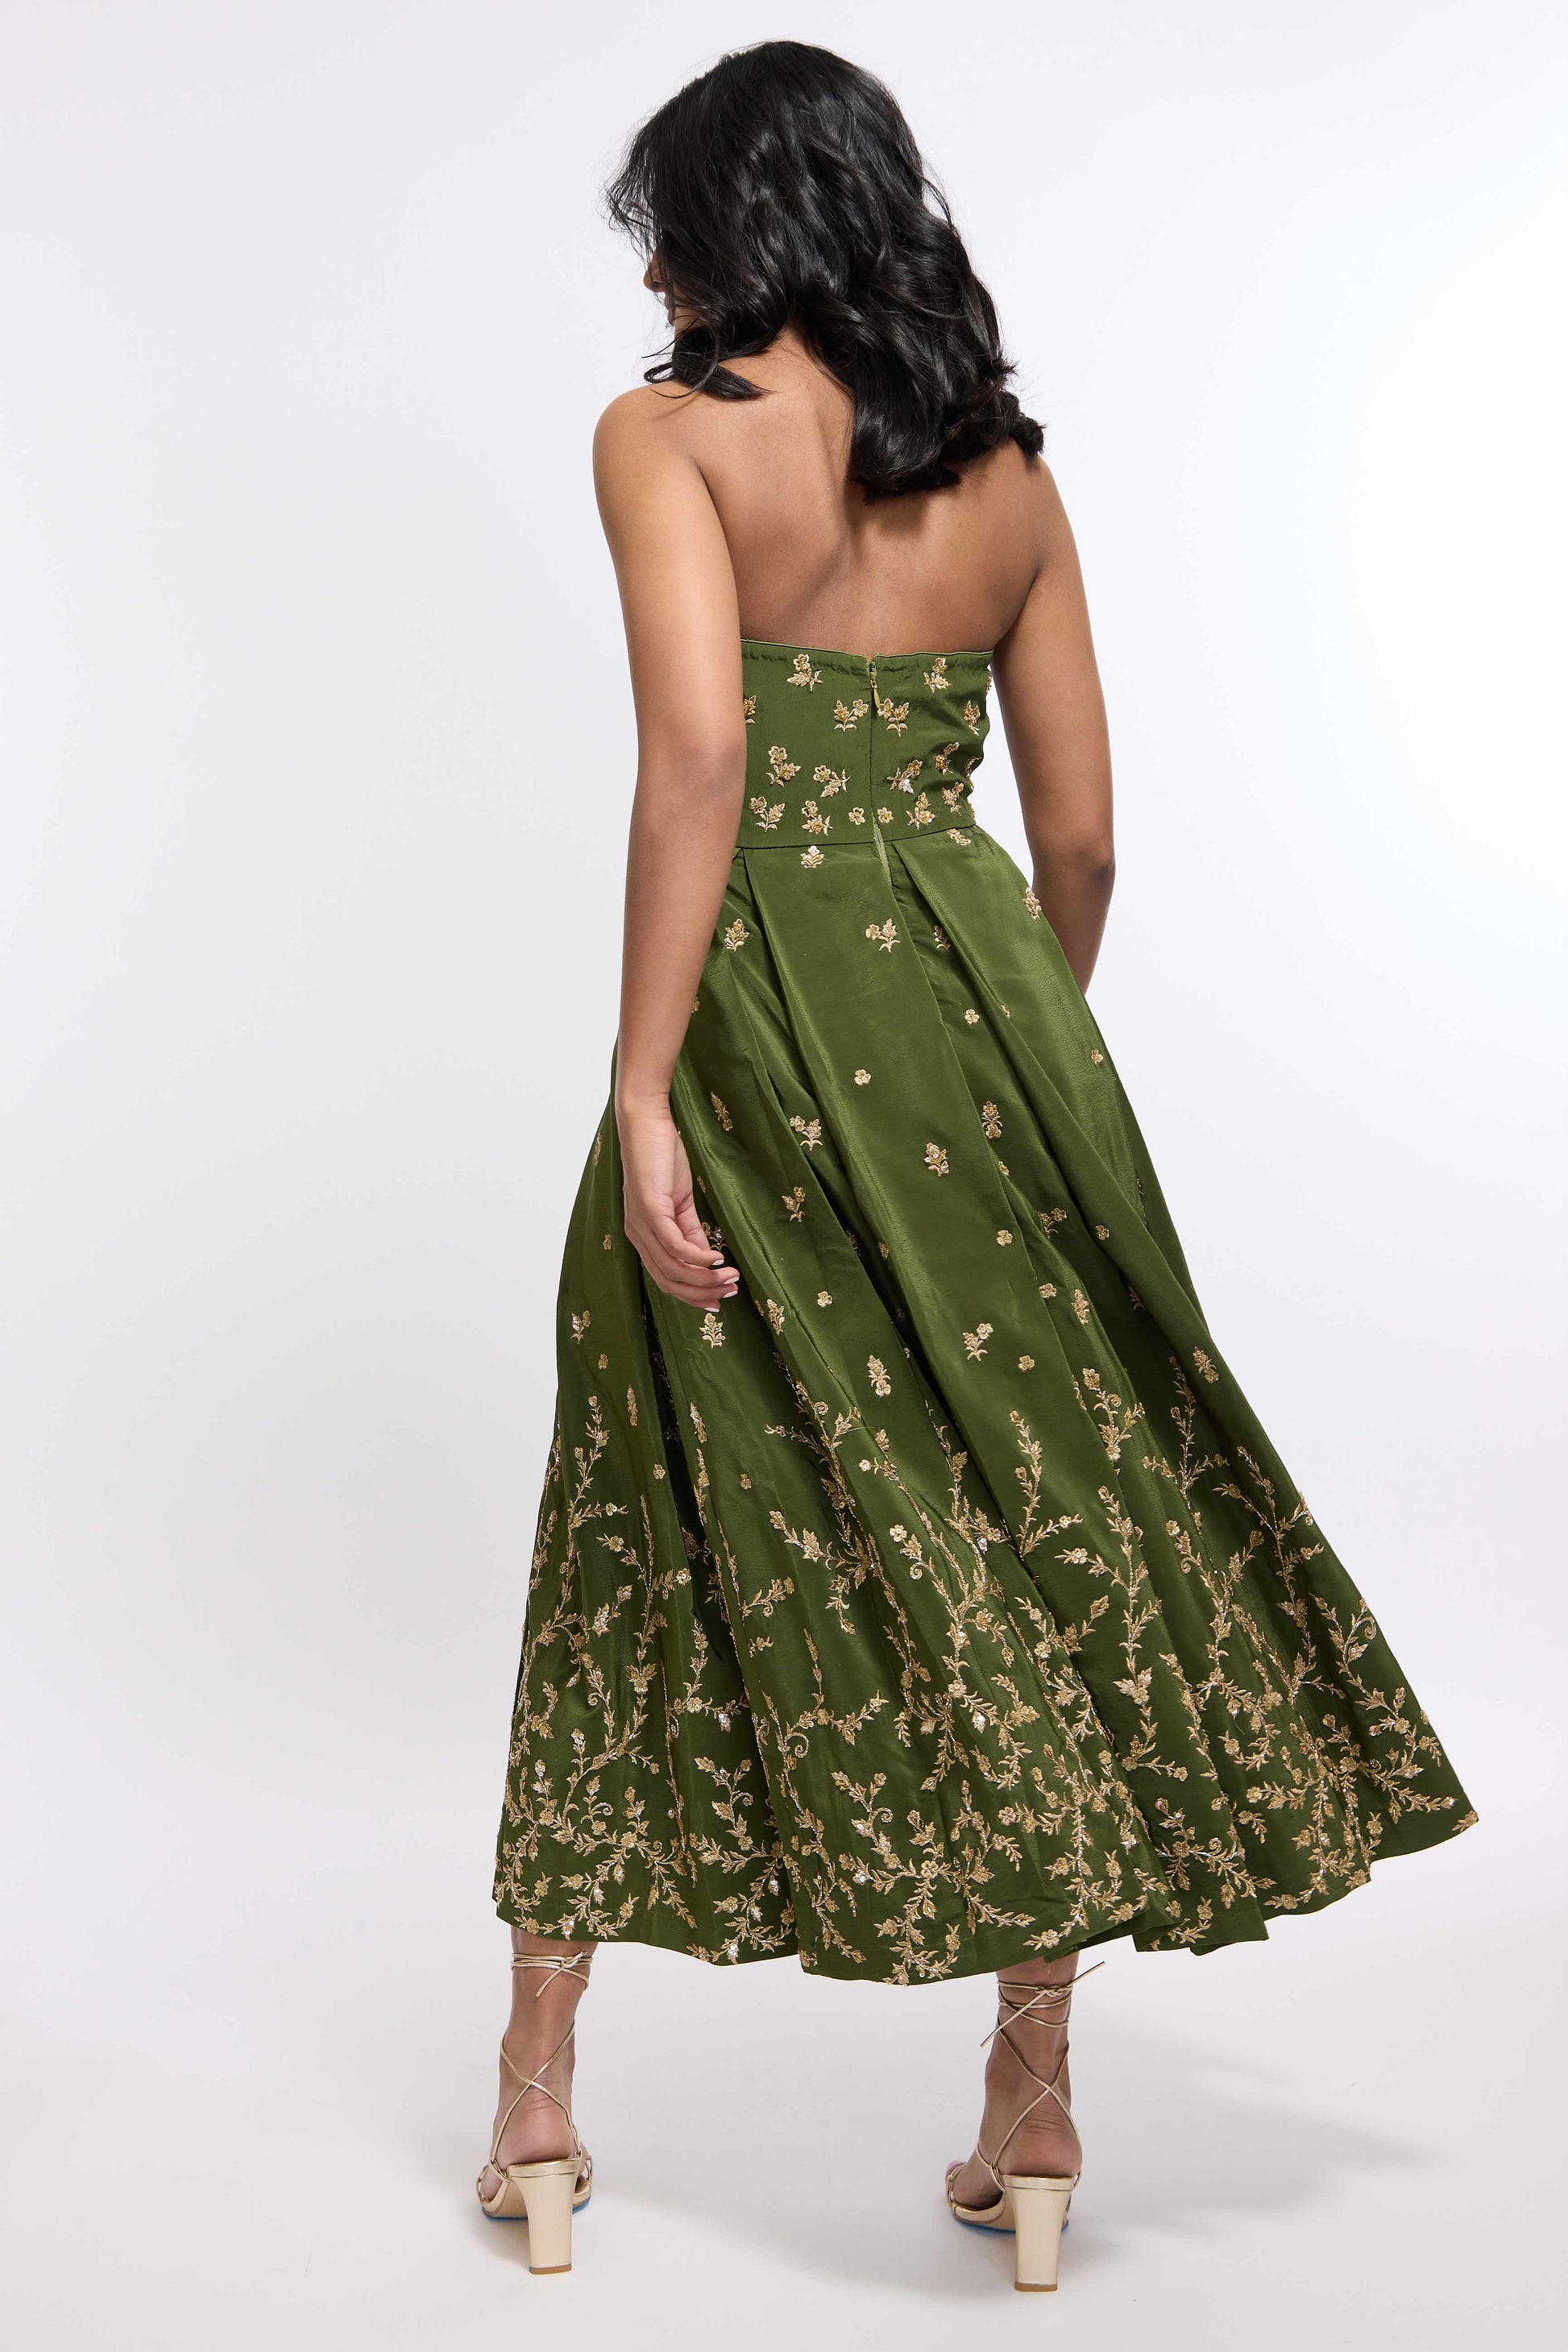 Woman wearing green midi length dress with Indian inspired embroidery